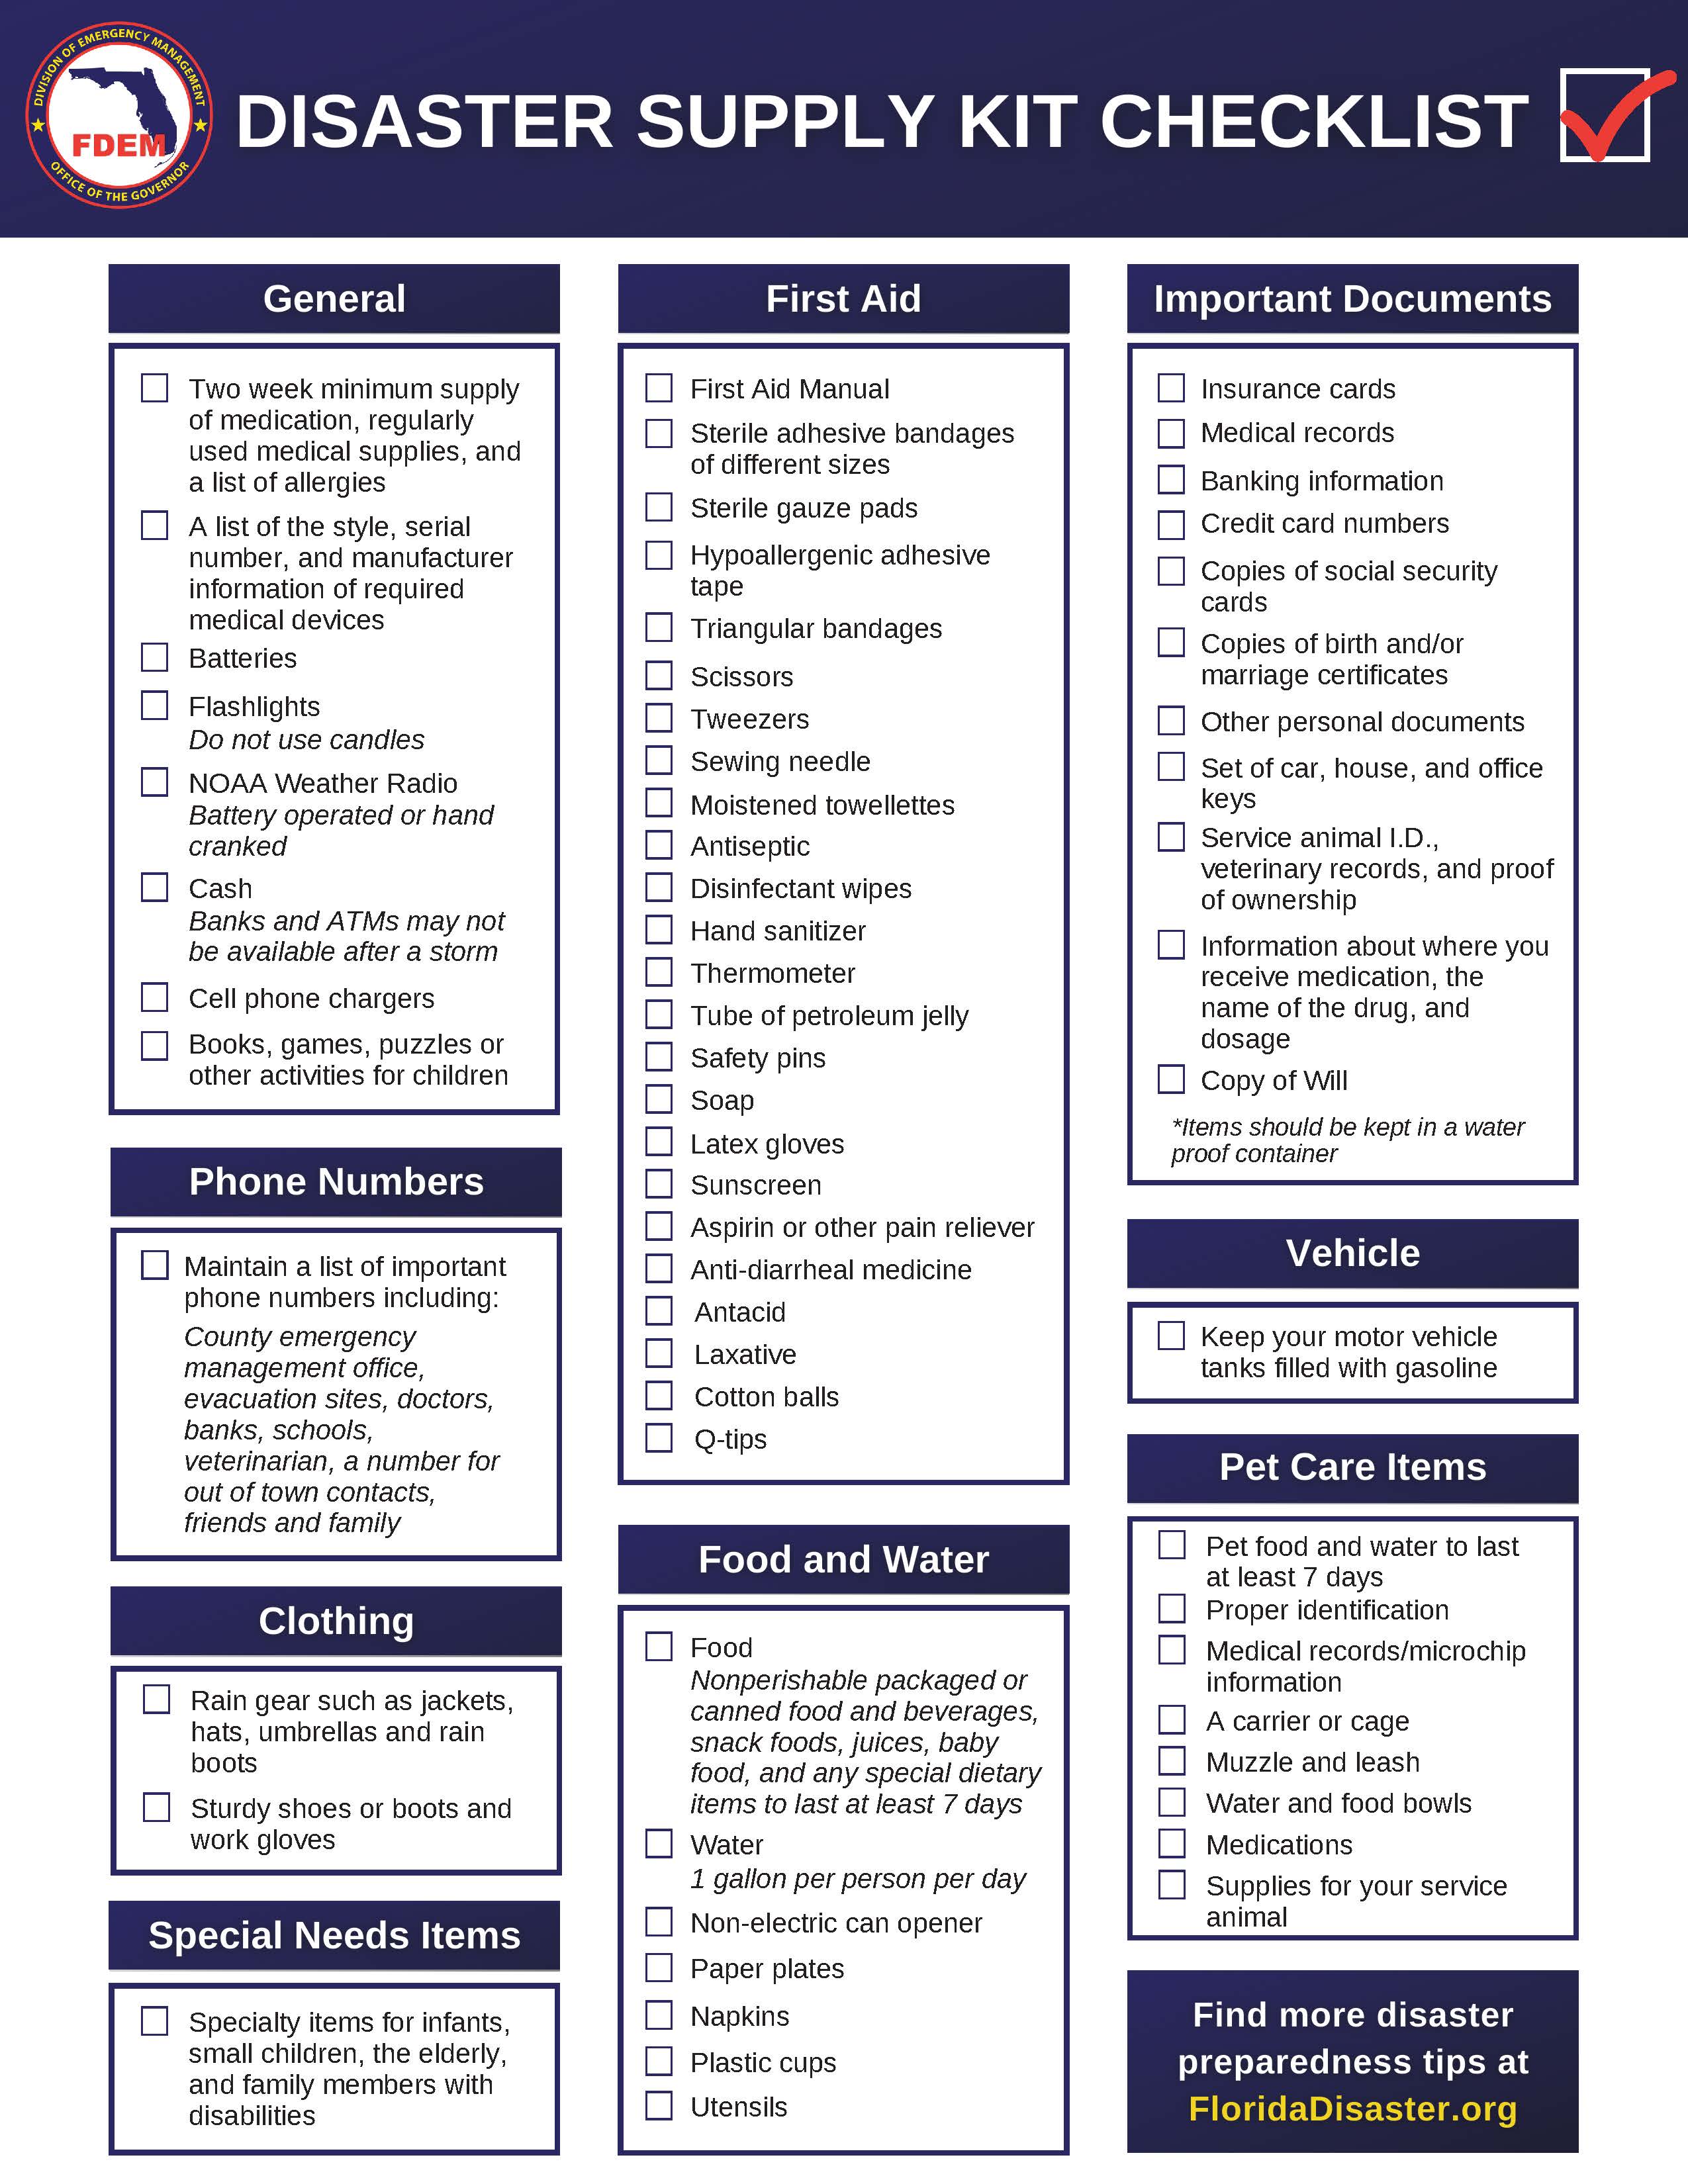 This is a disaster supply kit checklist from FloridaDisaster.org